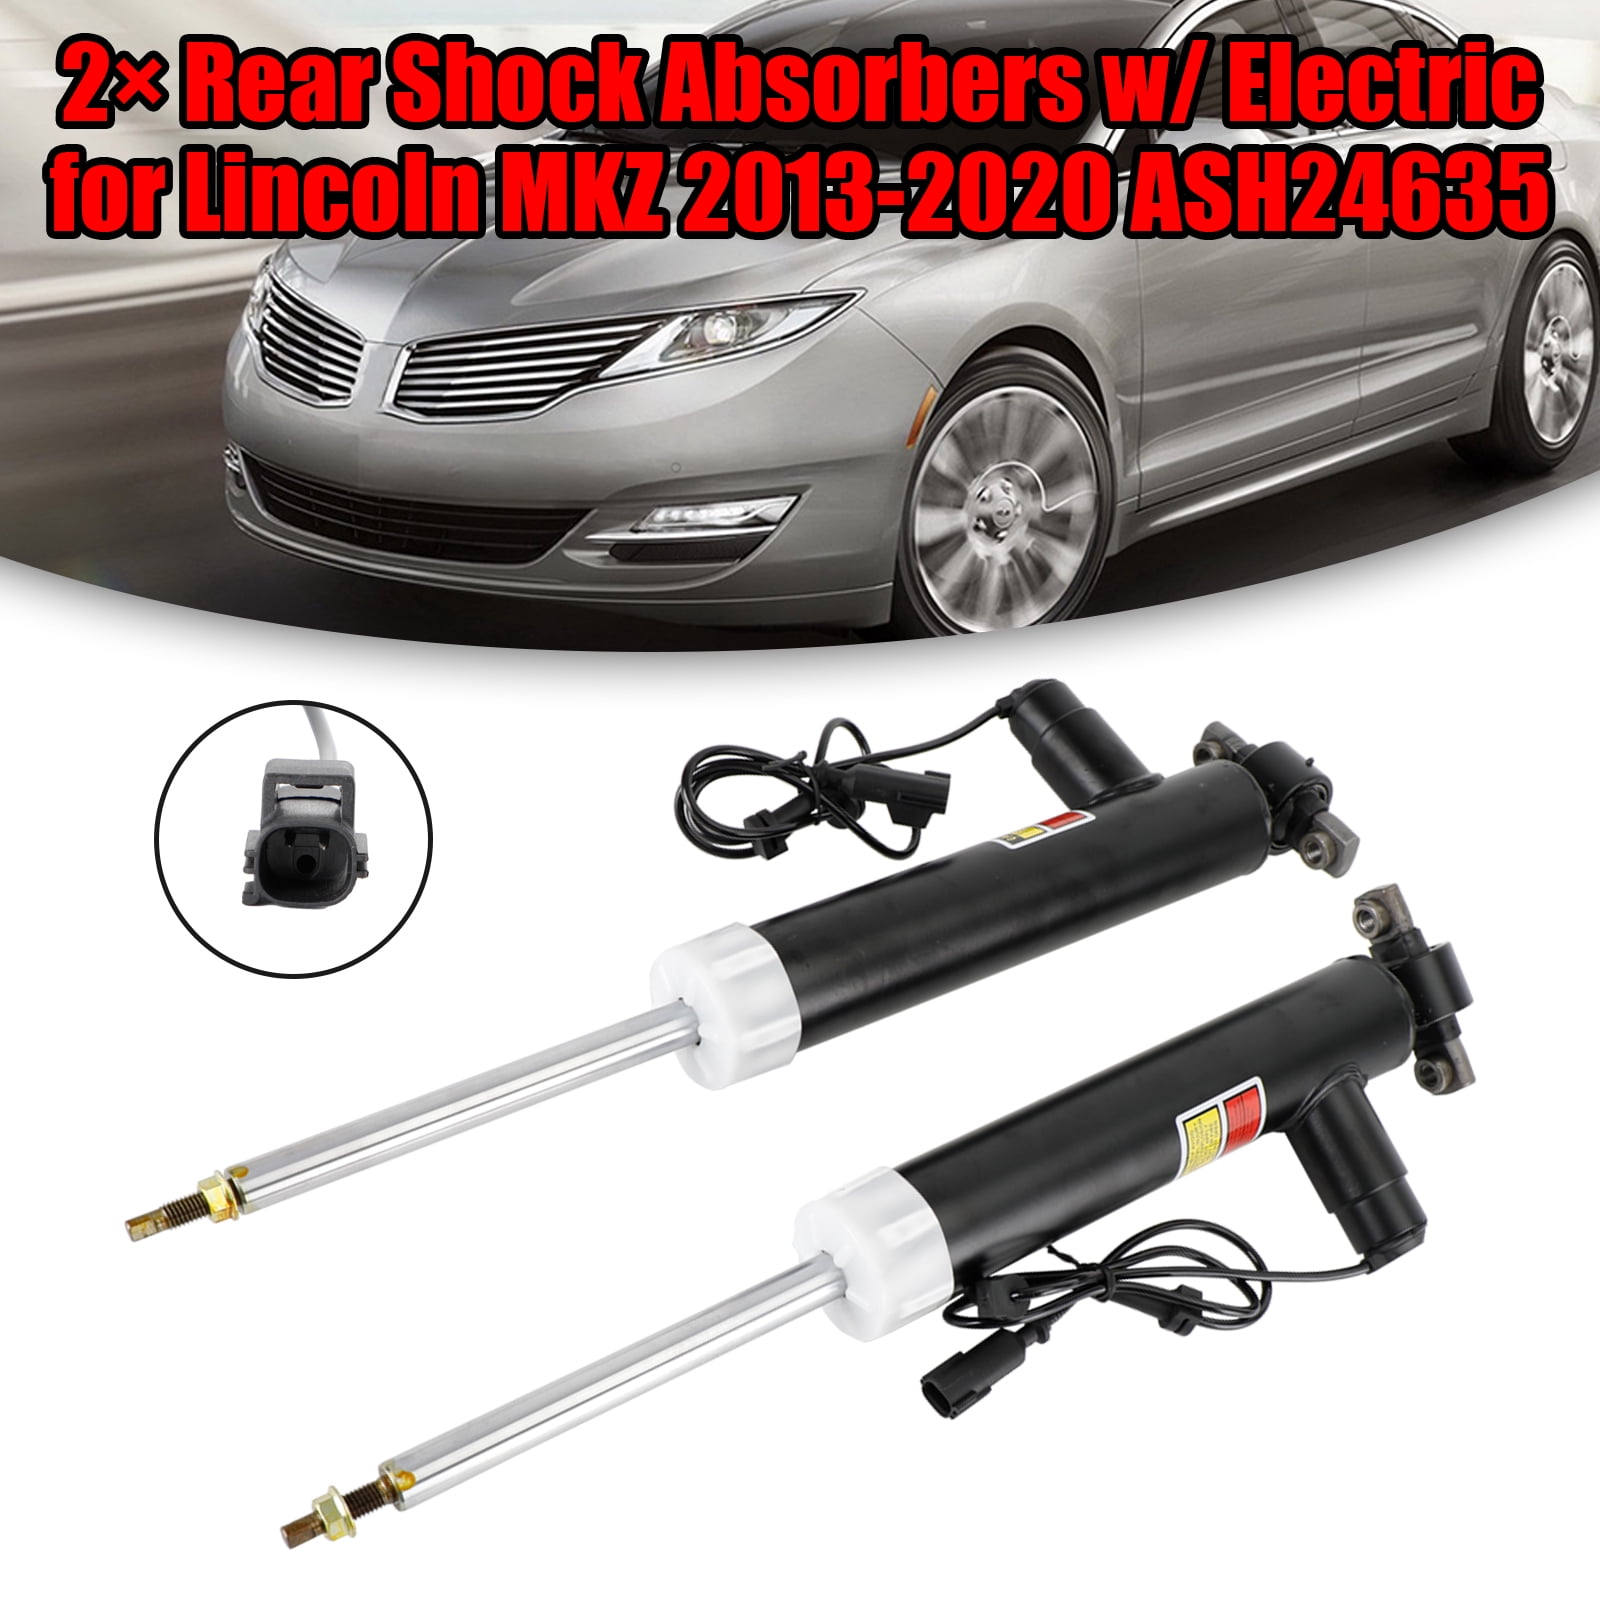 2 Rear Shock Absorbers w/ Electric for Lincoln MKZ 2013-2020 ASH24635